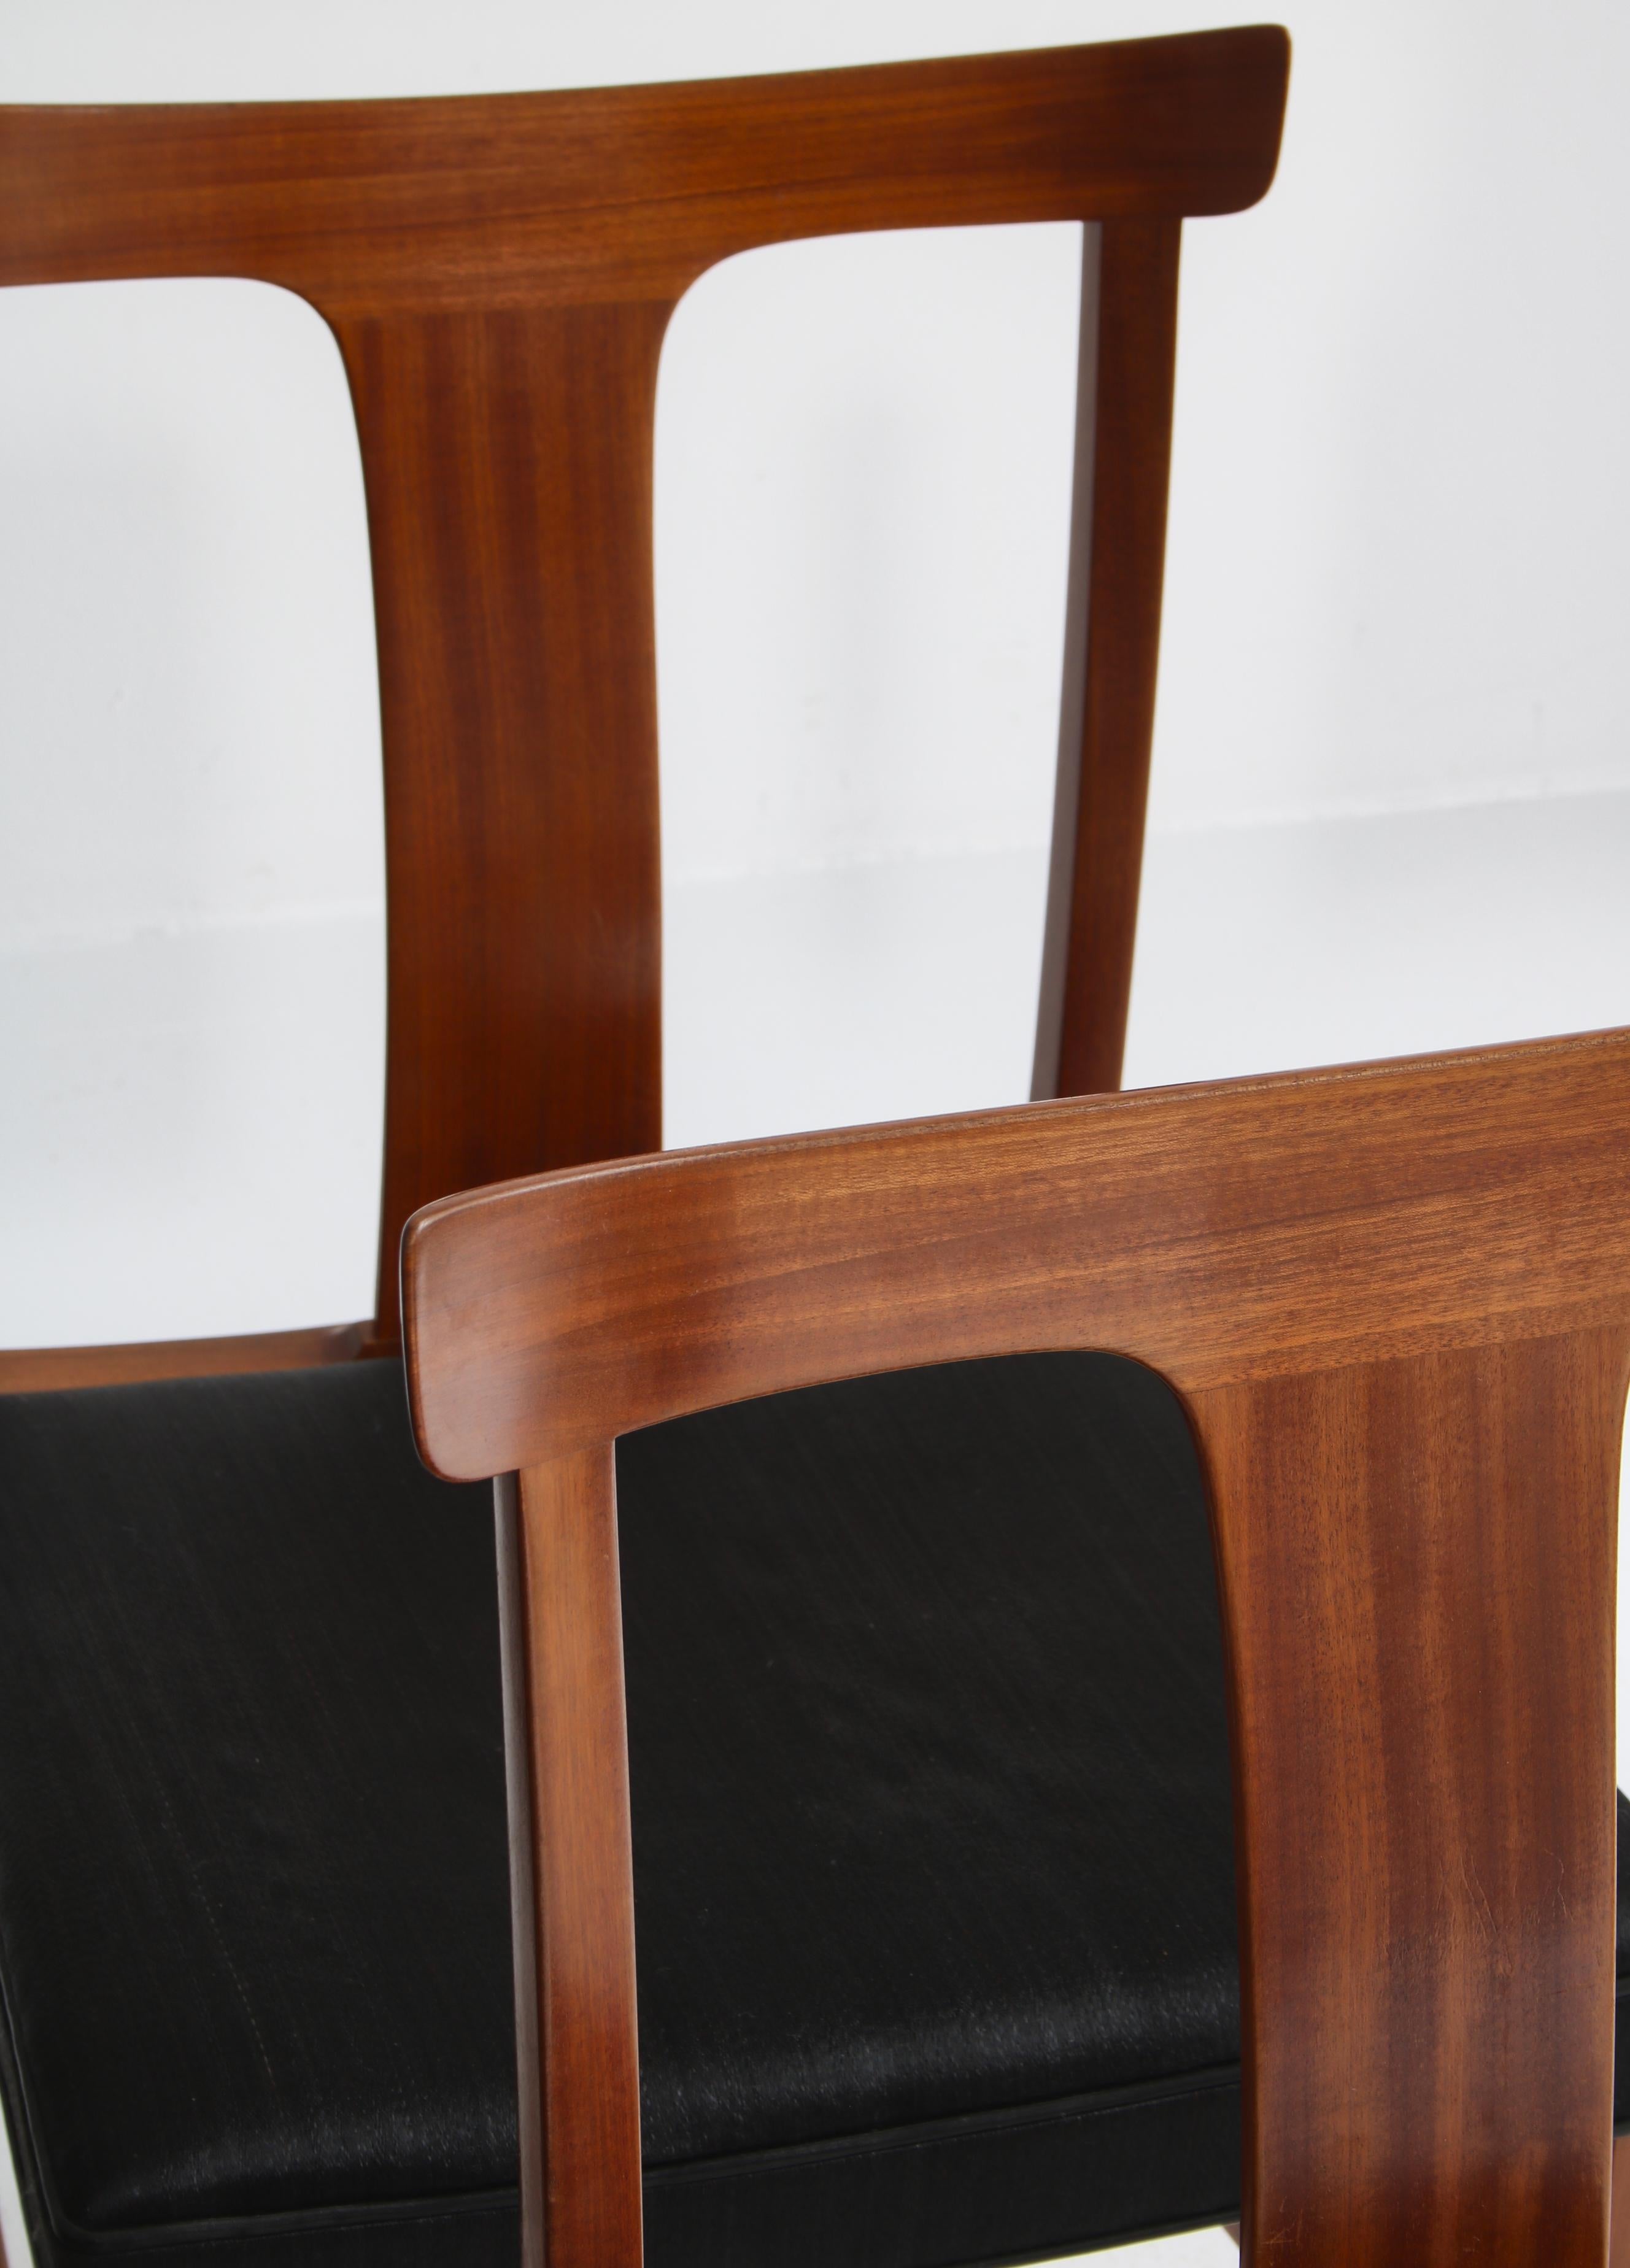 Scandinavian Modern Ole Wanscher Dining Chairs in Mahogany and Horsehair Made by A.J. Iversen, 1960s For Sale